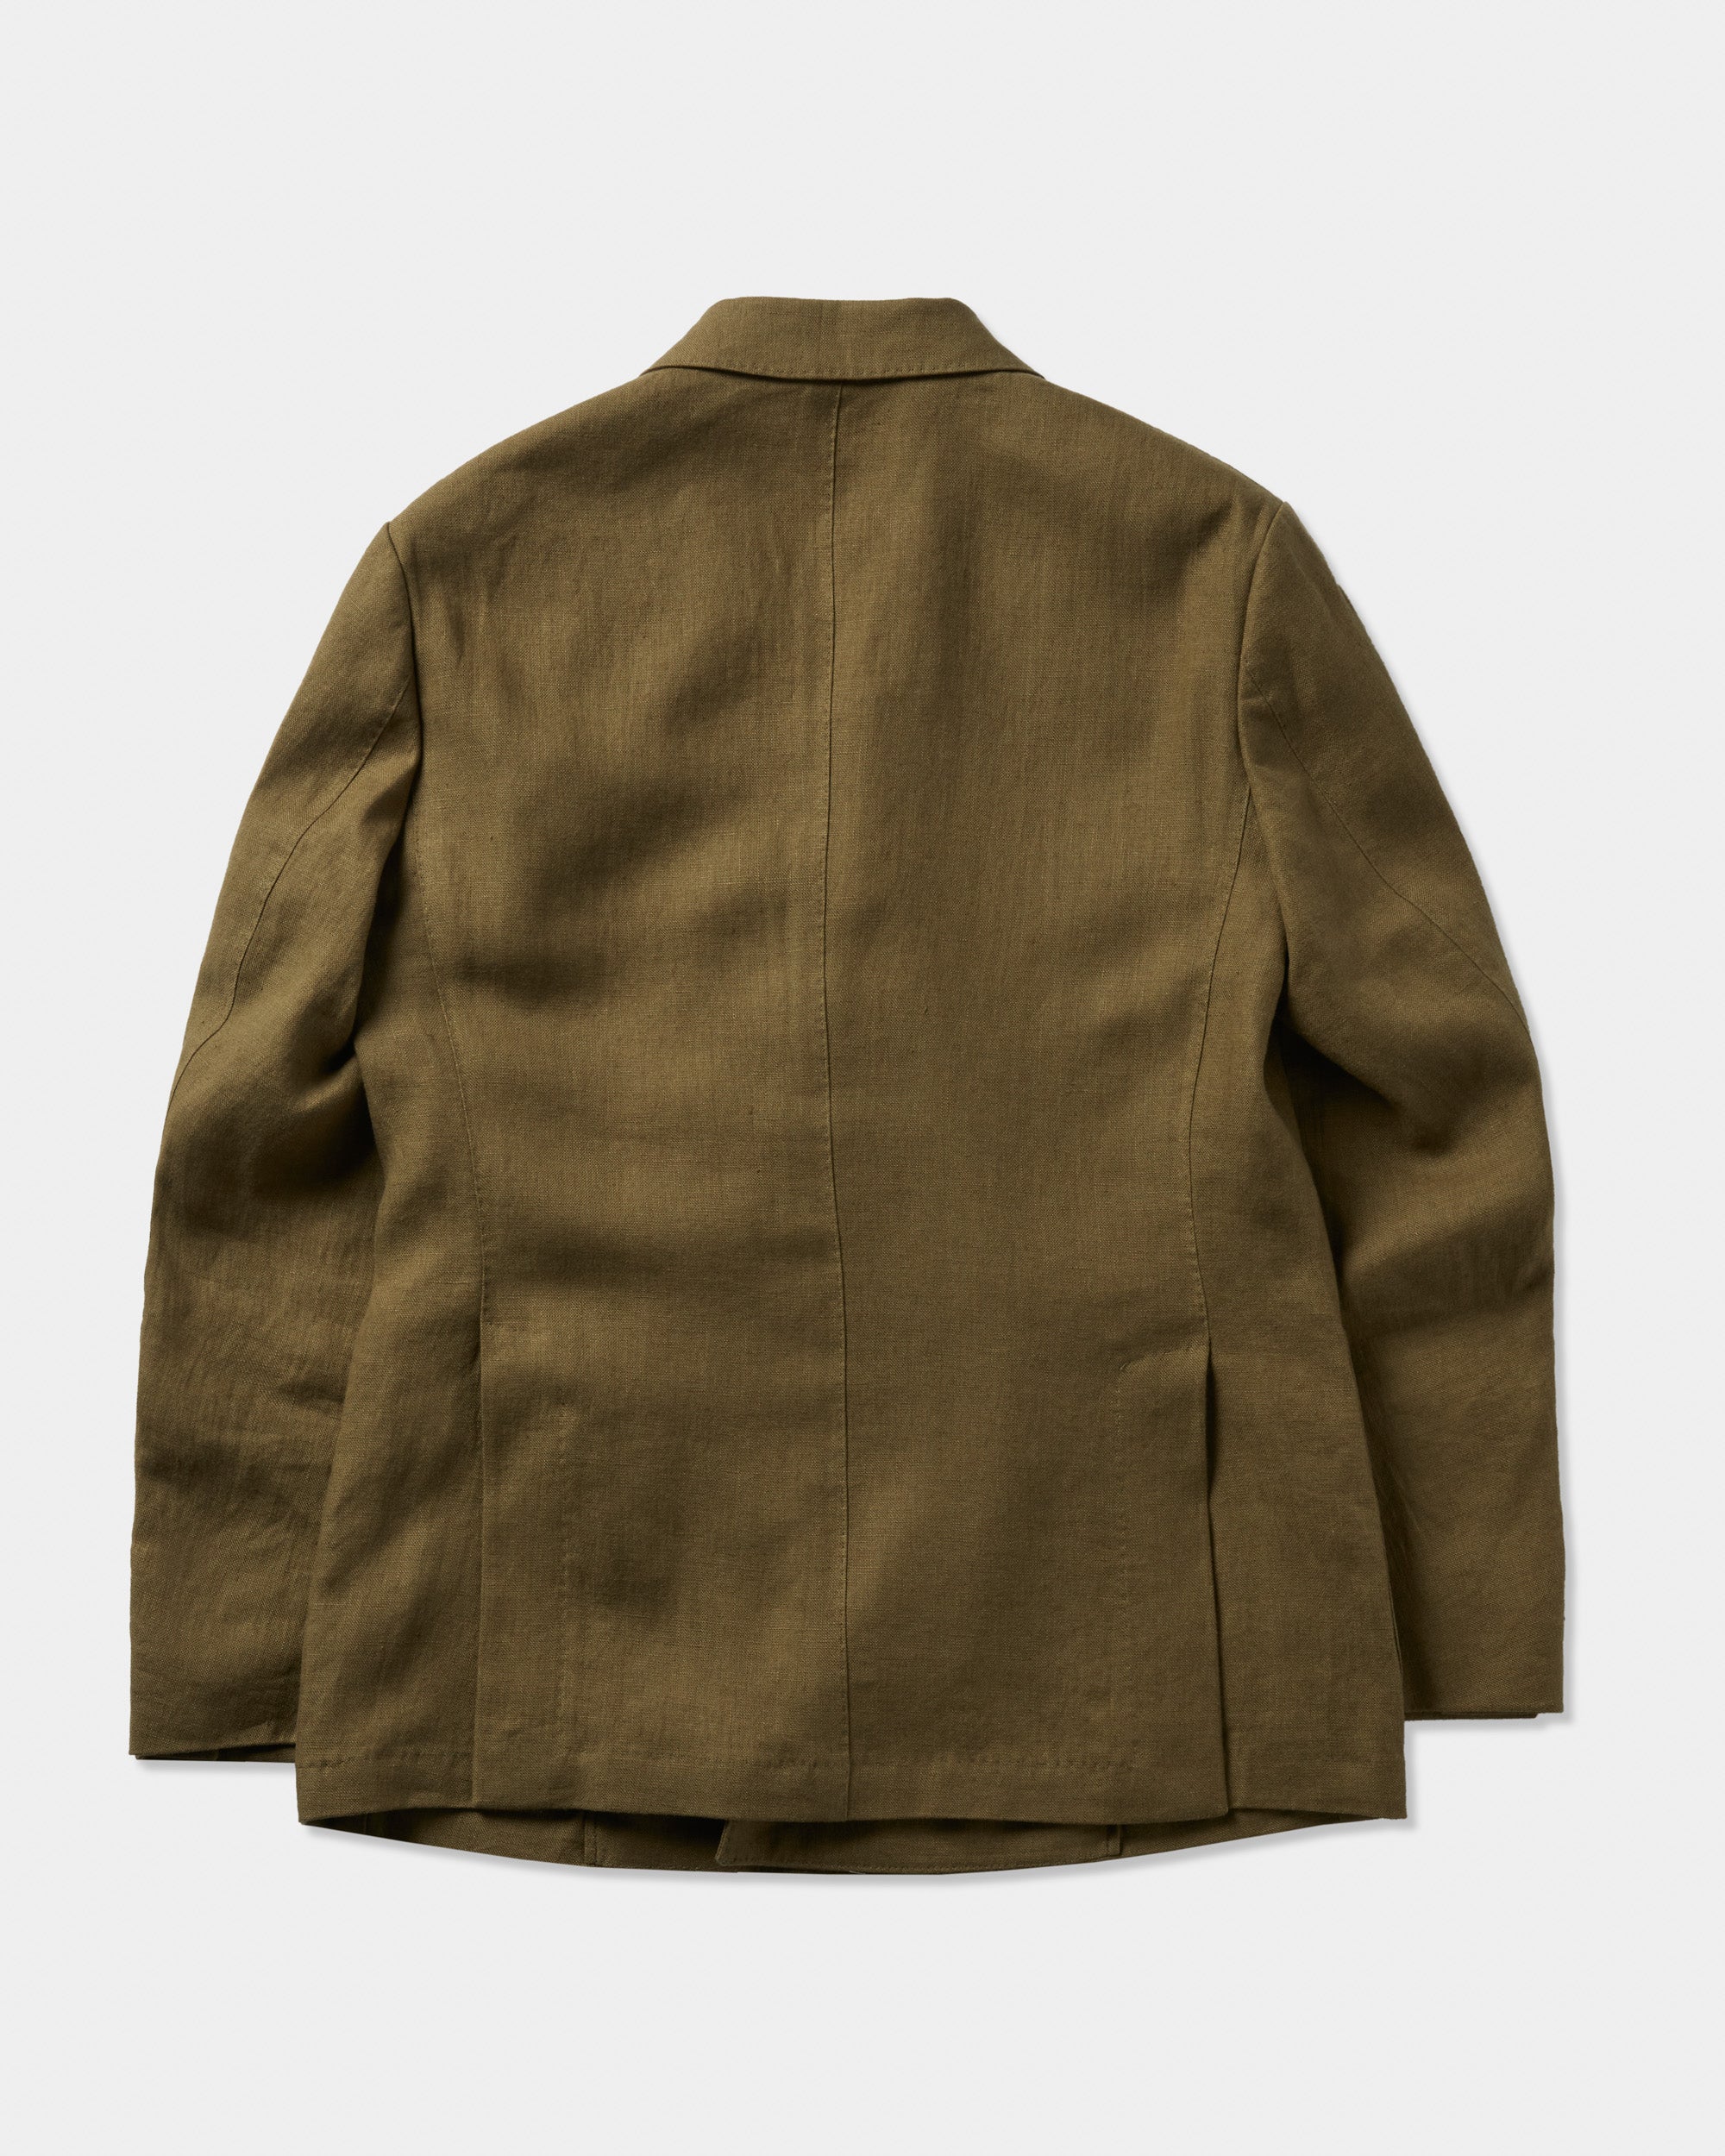 Velasca | Olive green double-breasted linen blazer, Made in Italy